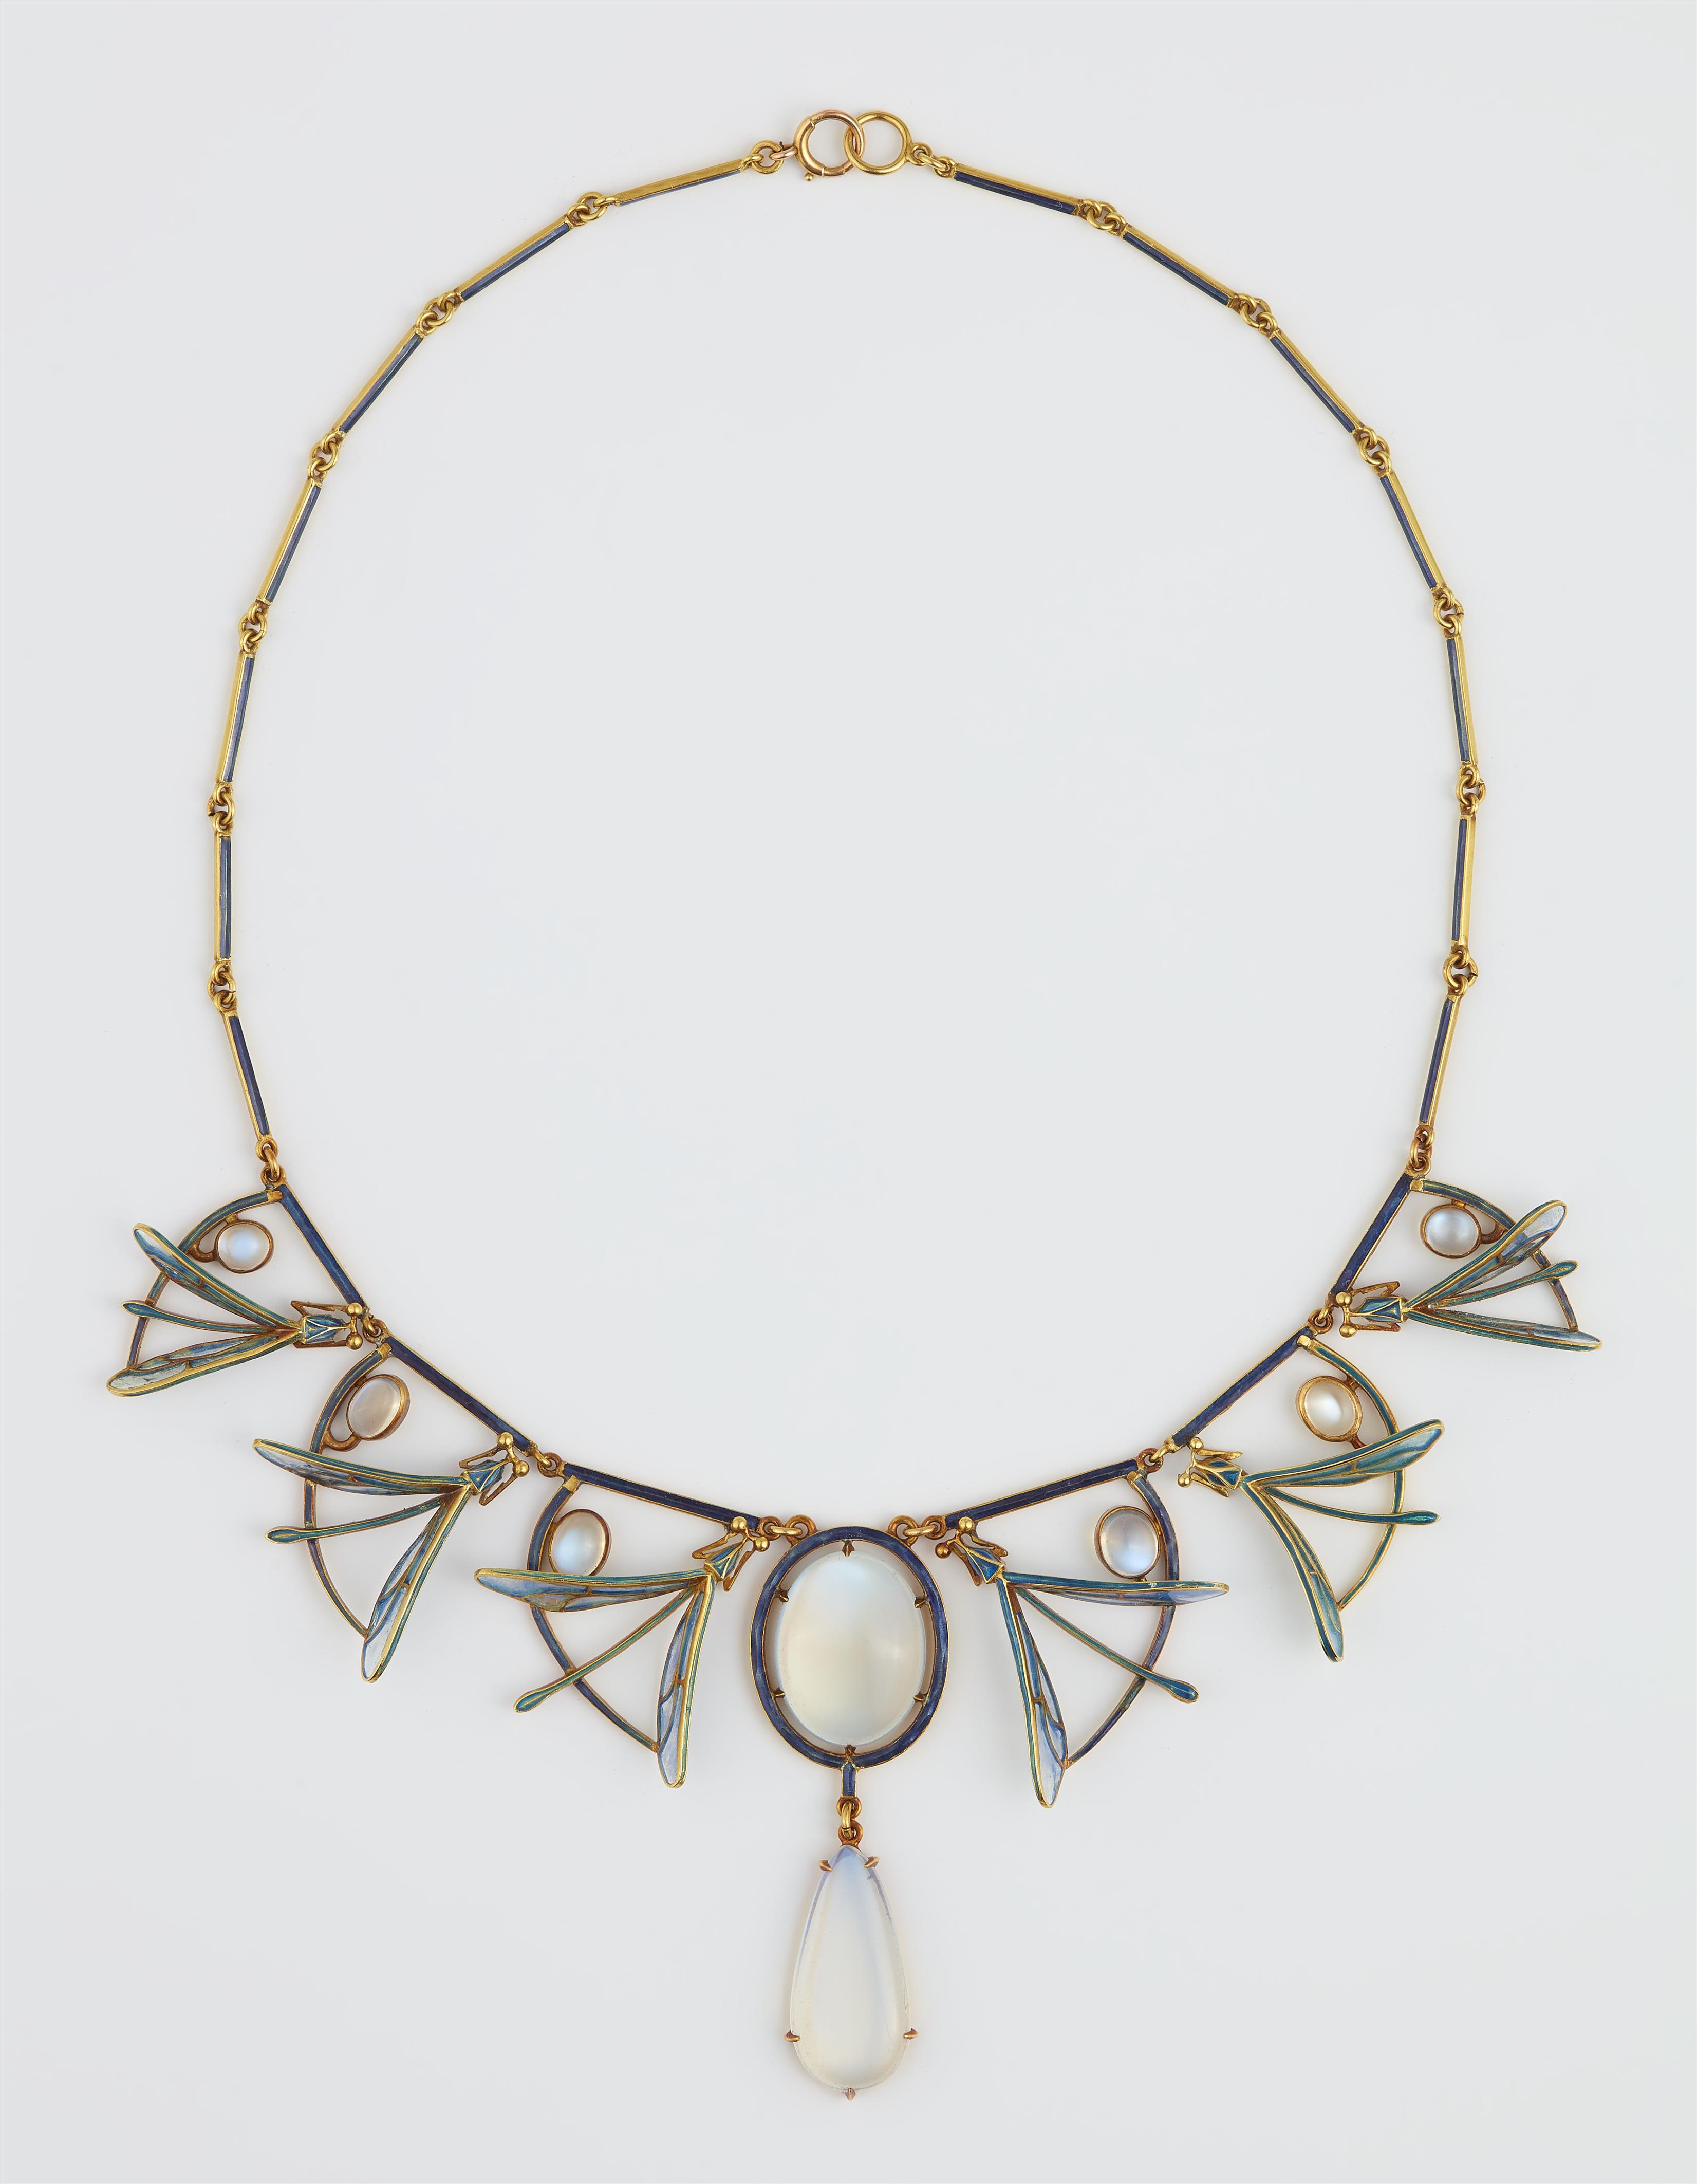 A British Arts & Crafts 18k gold, enamel and moonstone dragonfly necklace with original case of Liberty & Co. - image-1